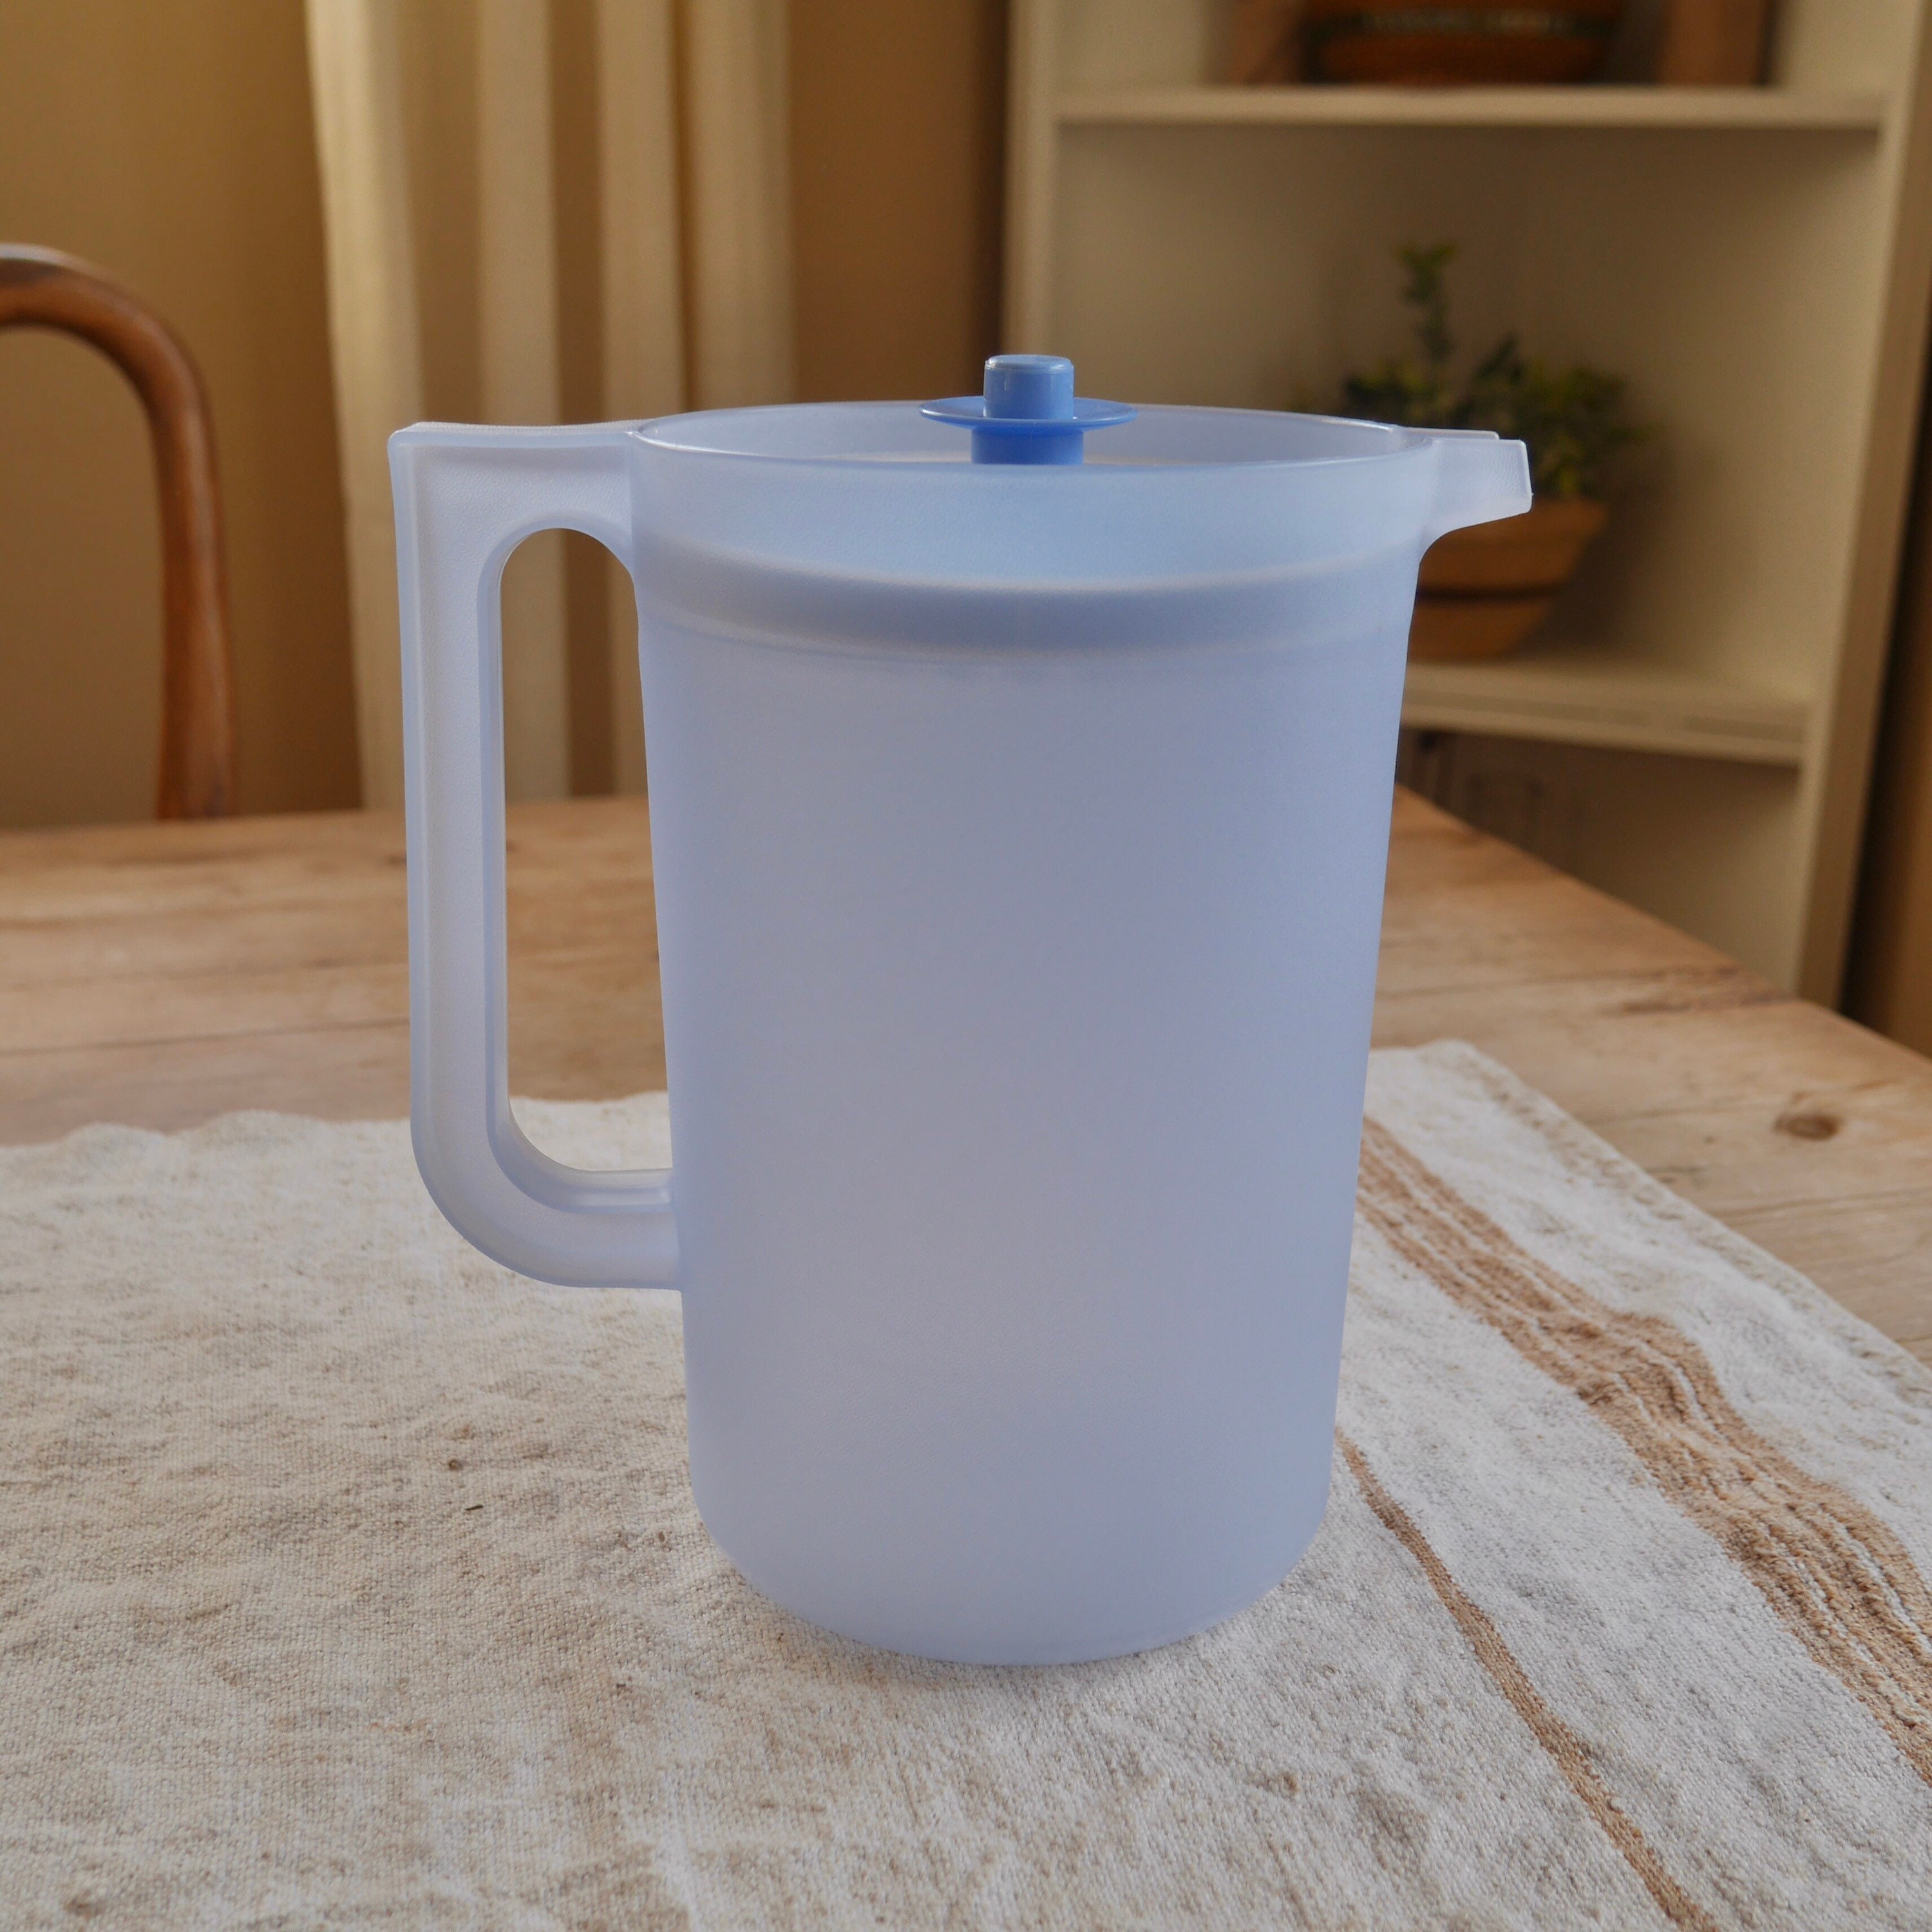 Tupperware 2 Quart Pitcher in Spa Blue with Push Button Seal New